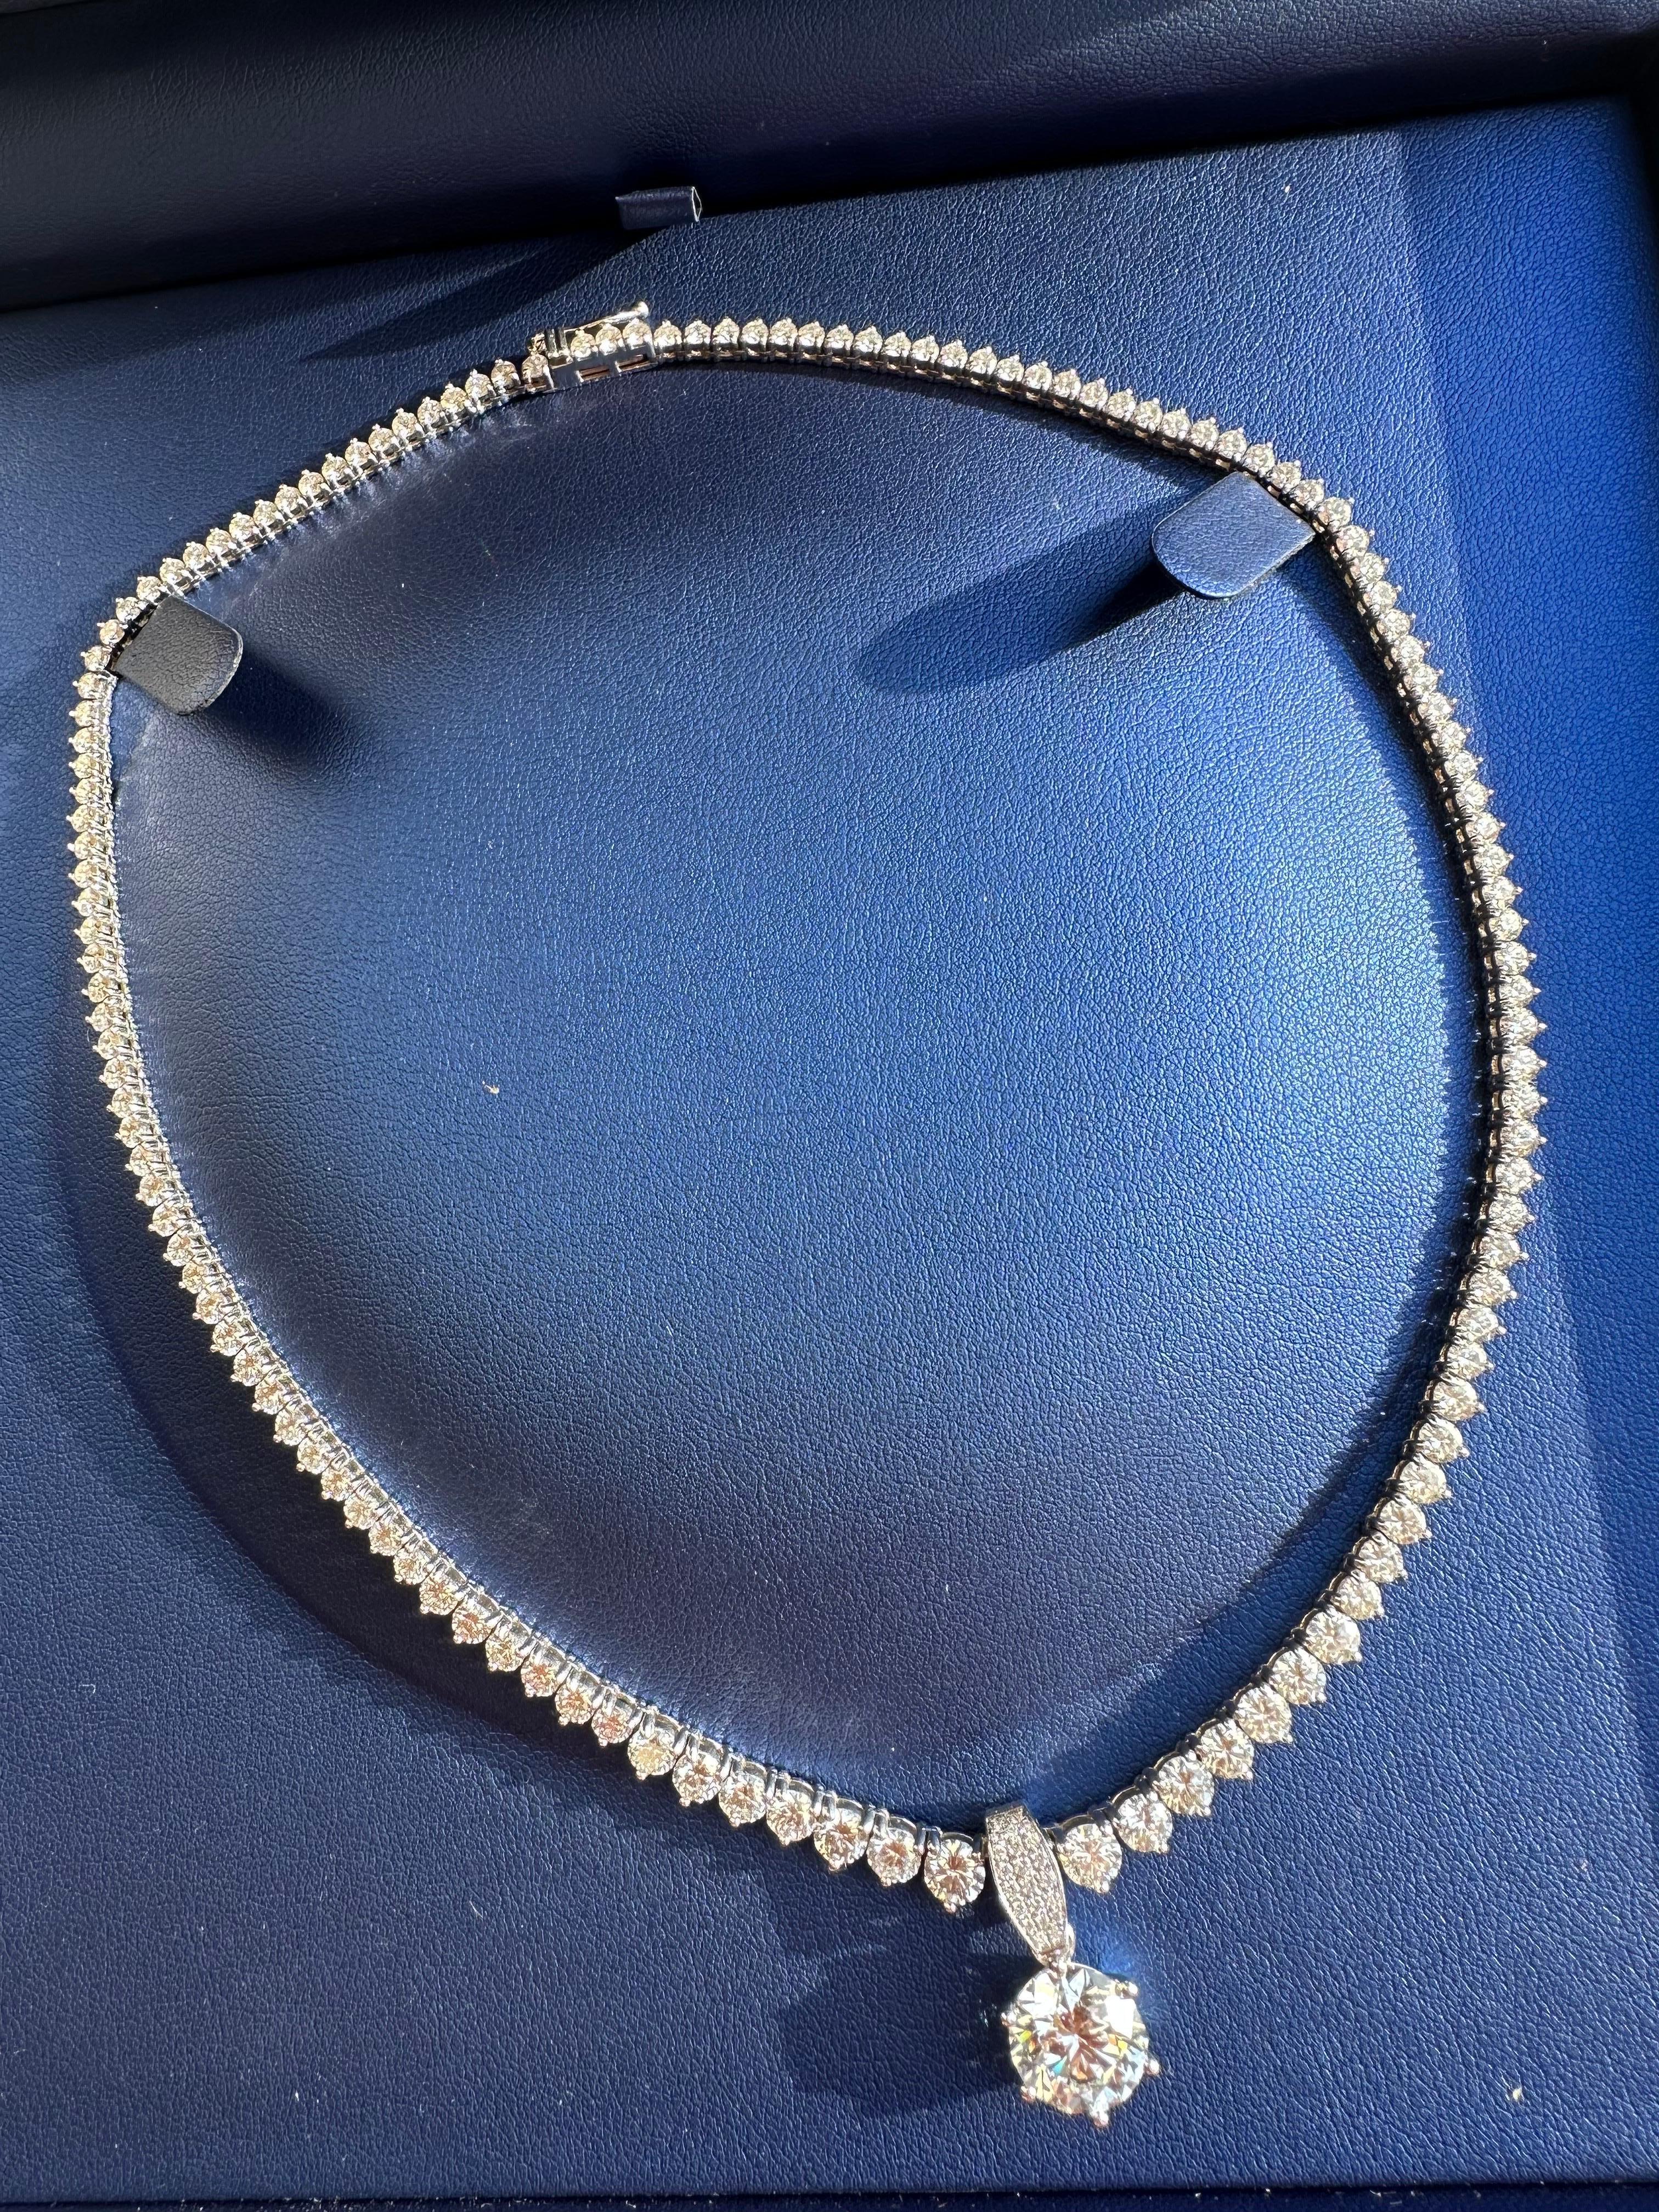 Brilliant Cut Stunning diamond necklace over 20 carats in 18KT gold For Sale